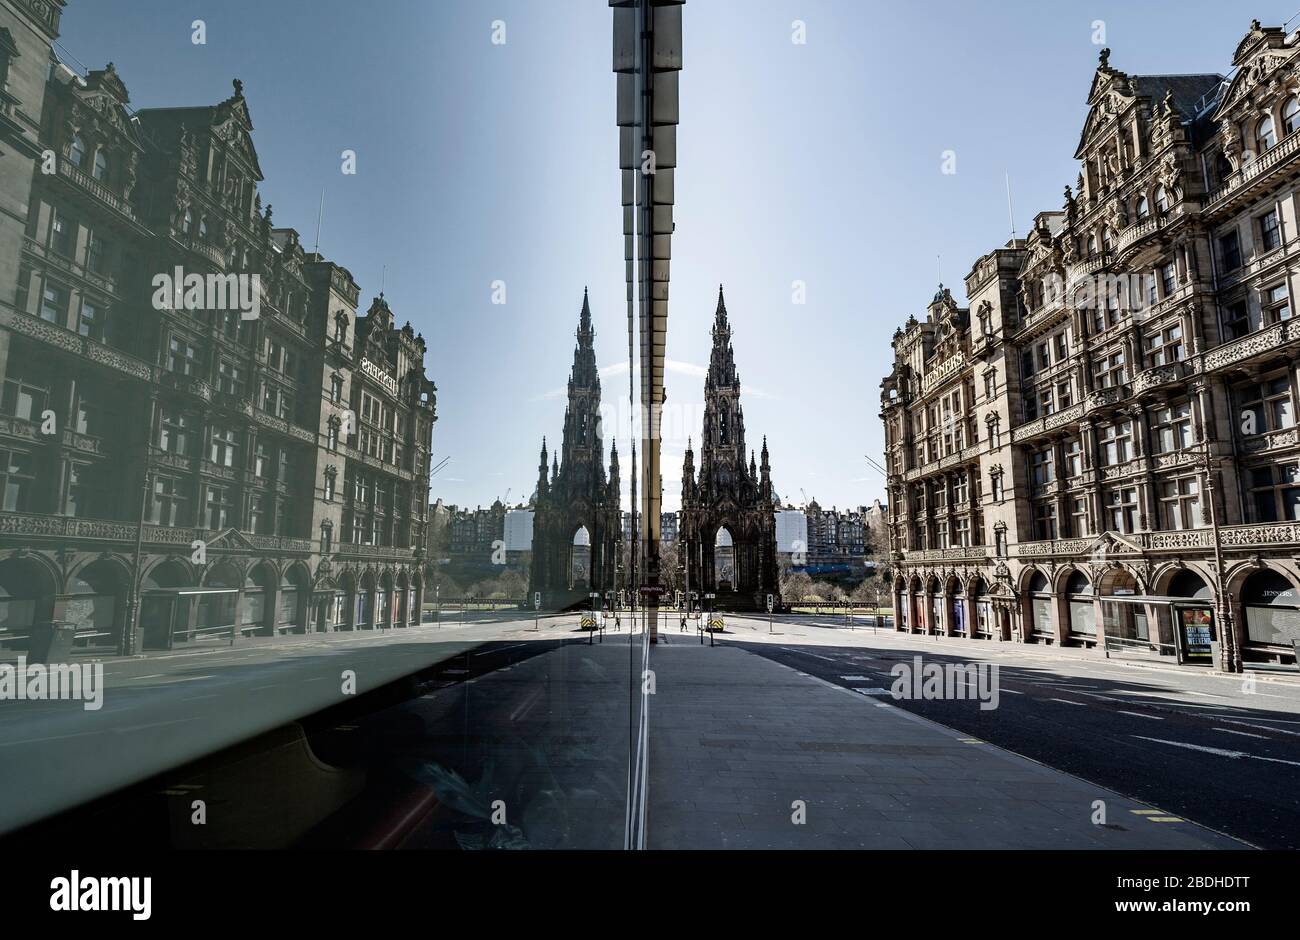 Images from Edinburgh during the continuing Coronavirus lockdown. Pictured; View of Scott monument from deserted South St David Street in city centre. Stock Photo